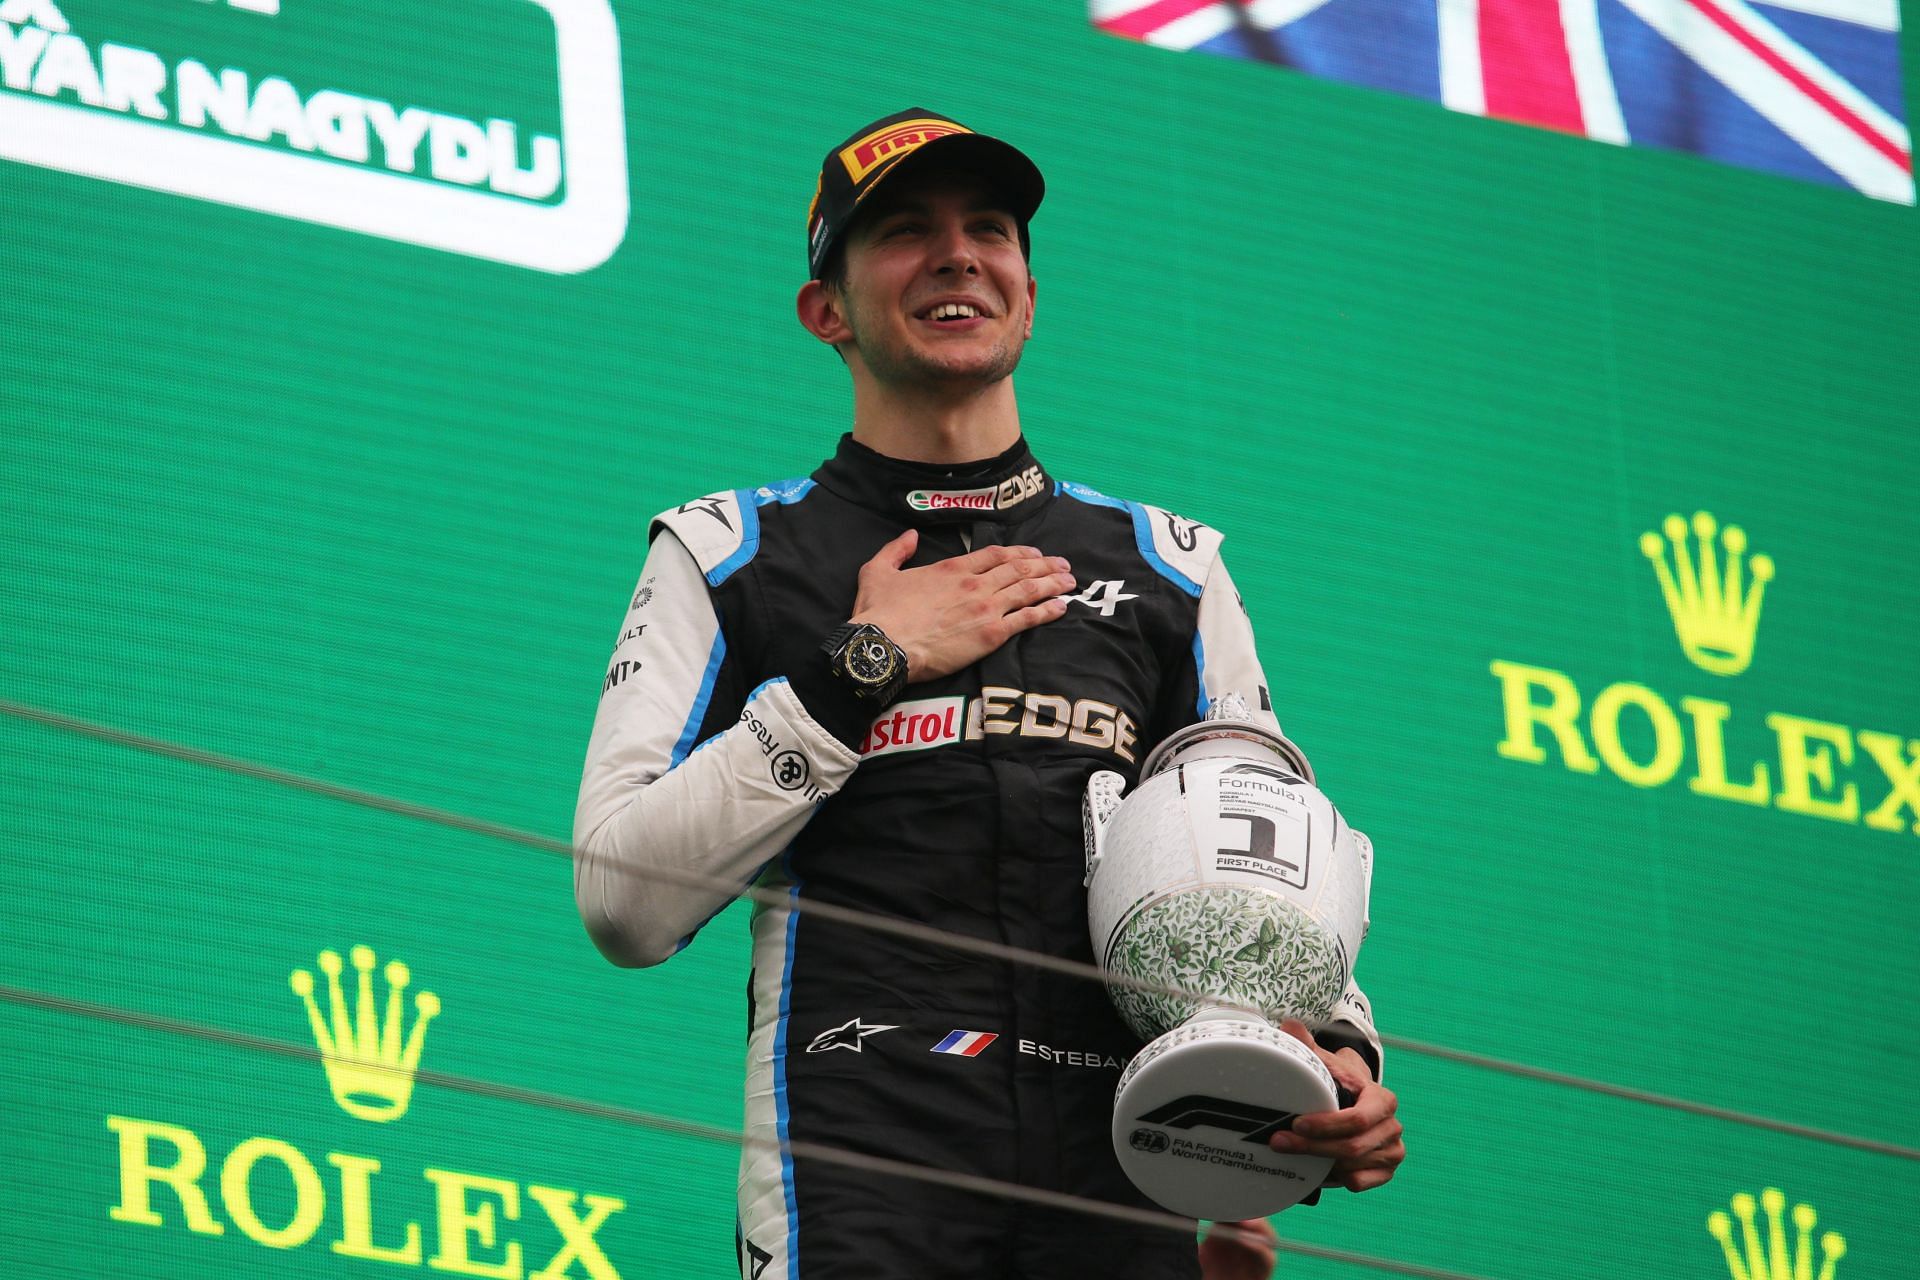 Esteban Ocon&#039;s win at Hungary was one of the surprises of the turbo-hybrid era